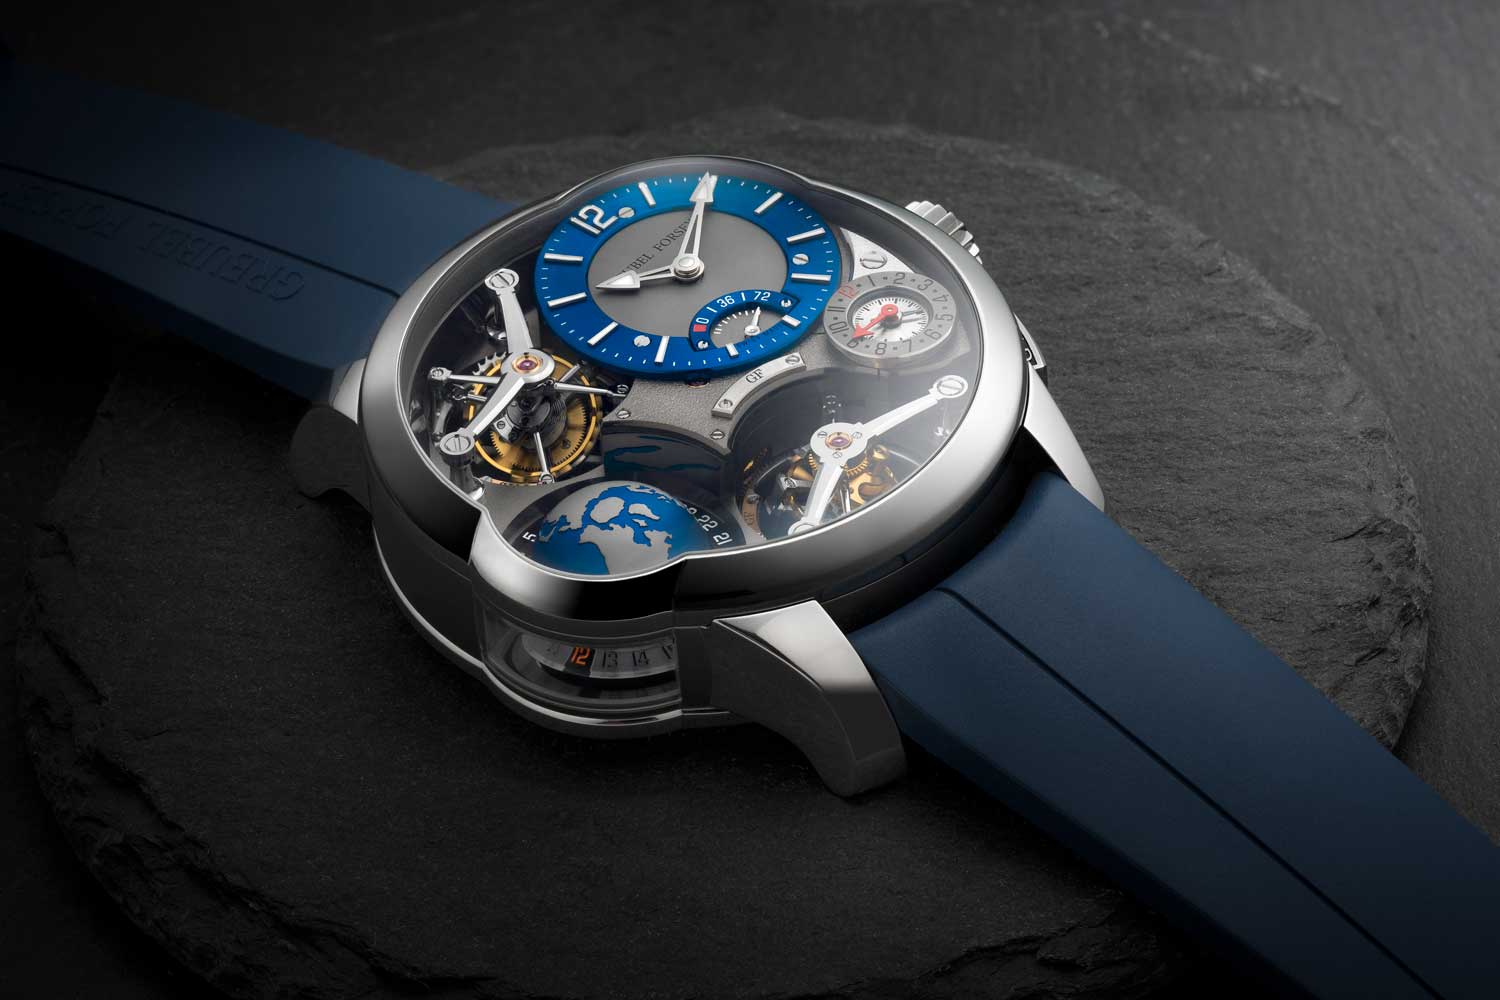 The GMT Quadruple Tourbillon is offered on a blue rubber strap that adds to its versatility and sporty appeal.